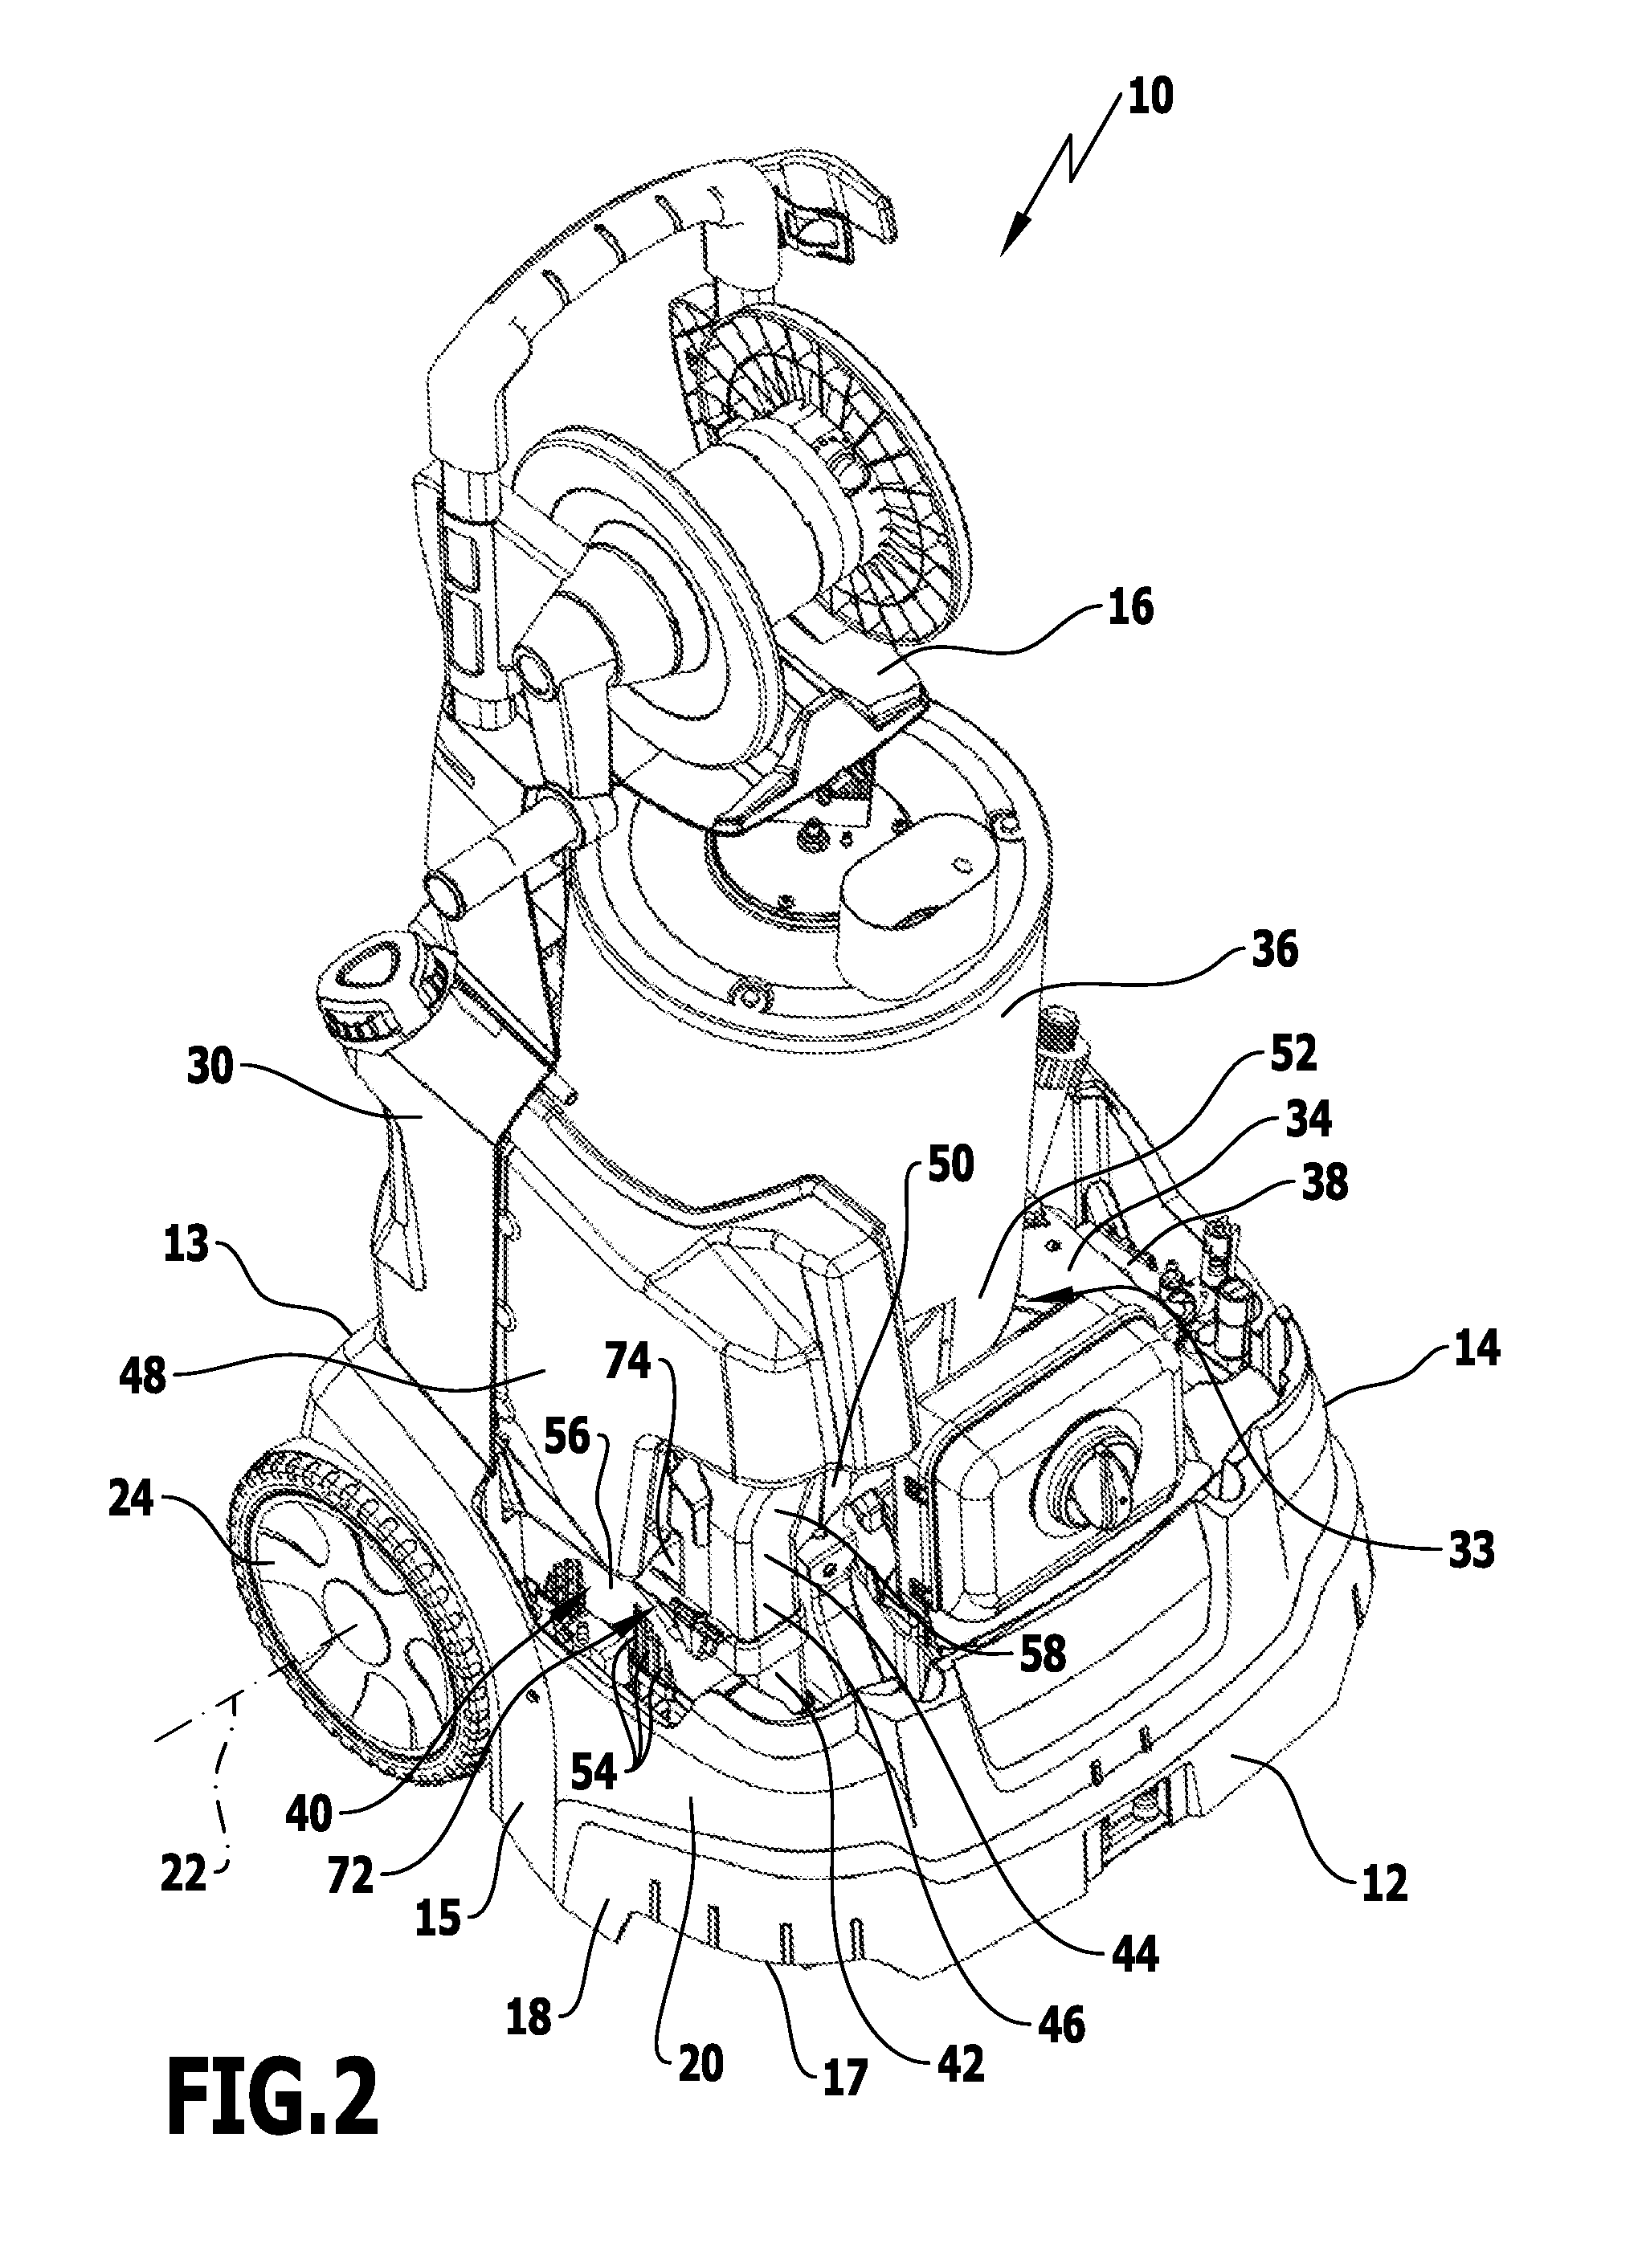 High-pressure cleaning appliance with movable channel constriction section